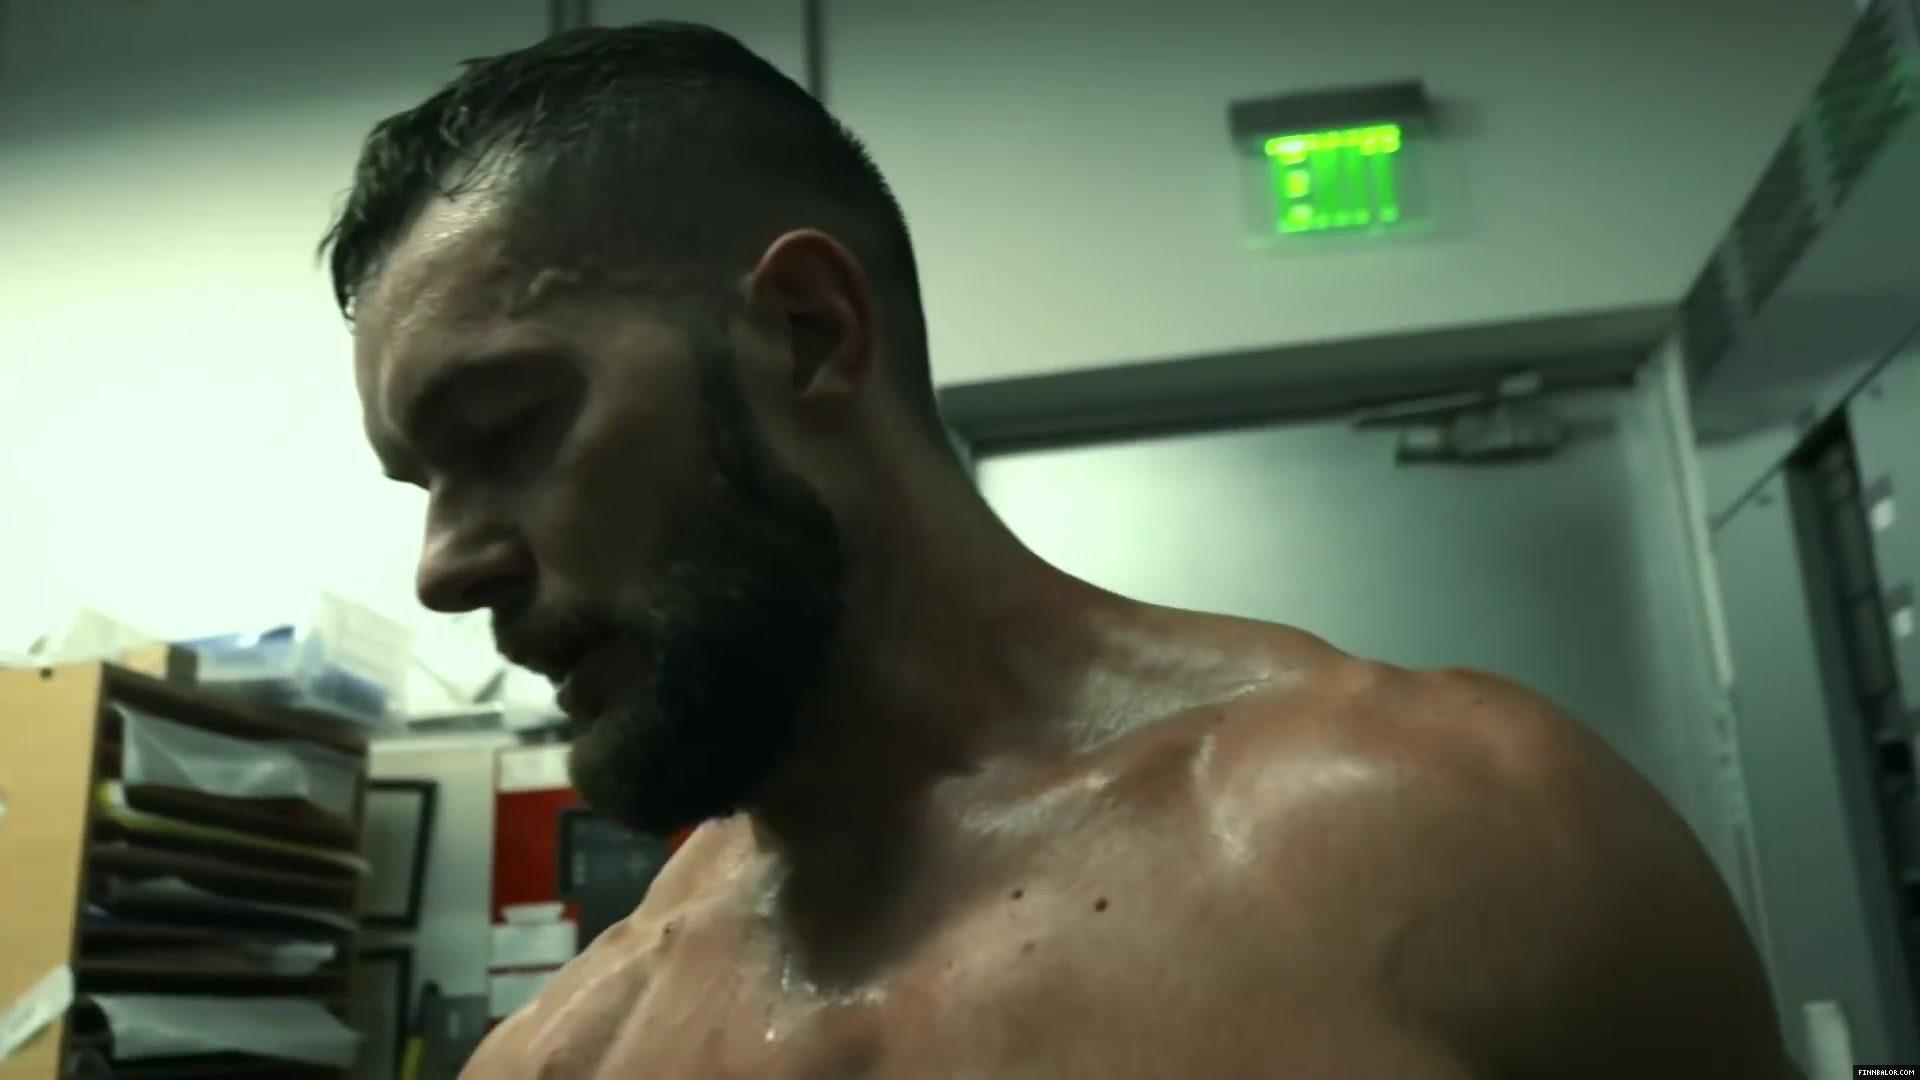 Finn_Balor___The_Rising_of_the_Prince_in_NXT_231.jpg